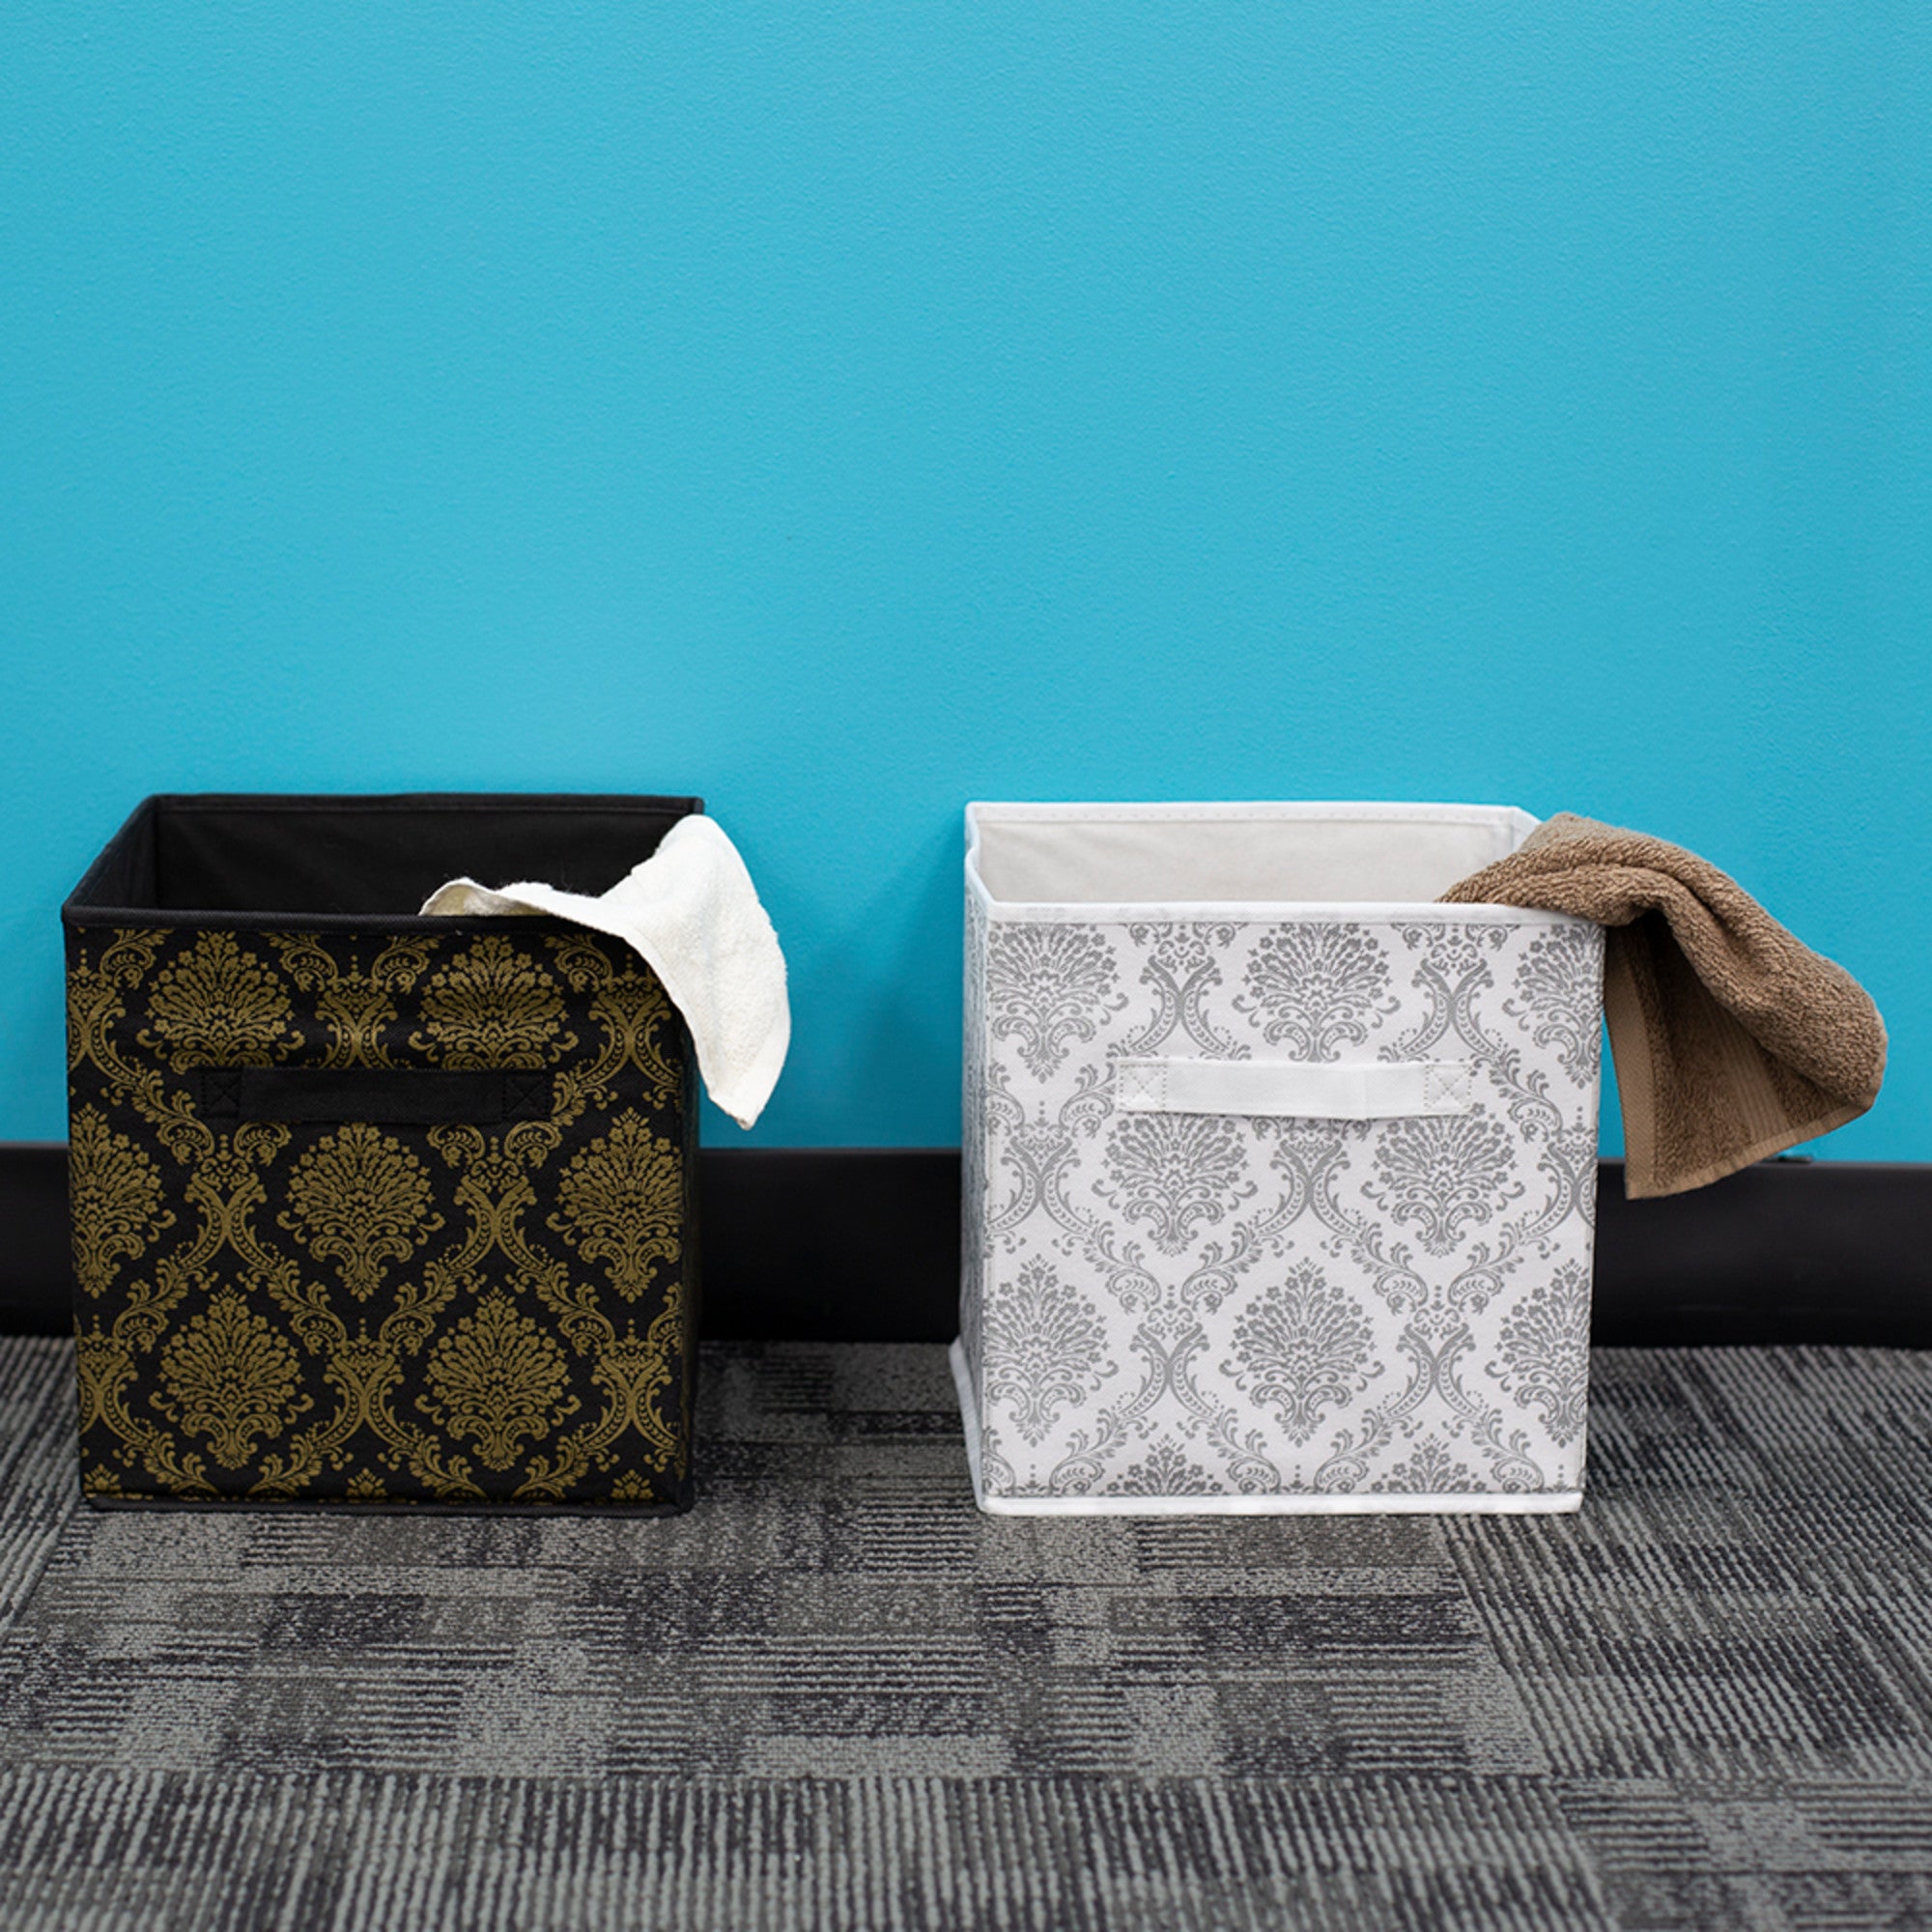 Home Basics Metallic Damask Non-Woven Fabric Collapsible Storage Cube with Built-in Handle - Assorted Colors